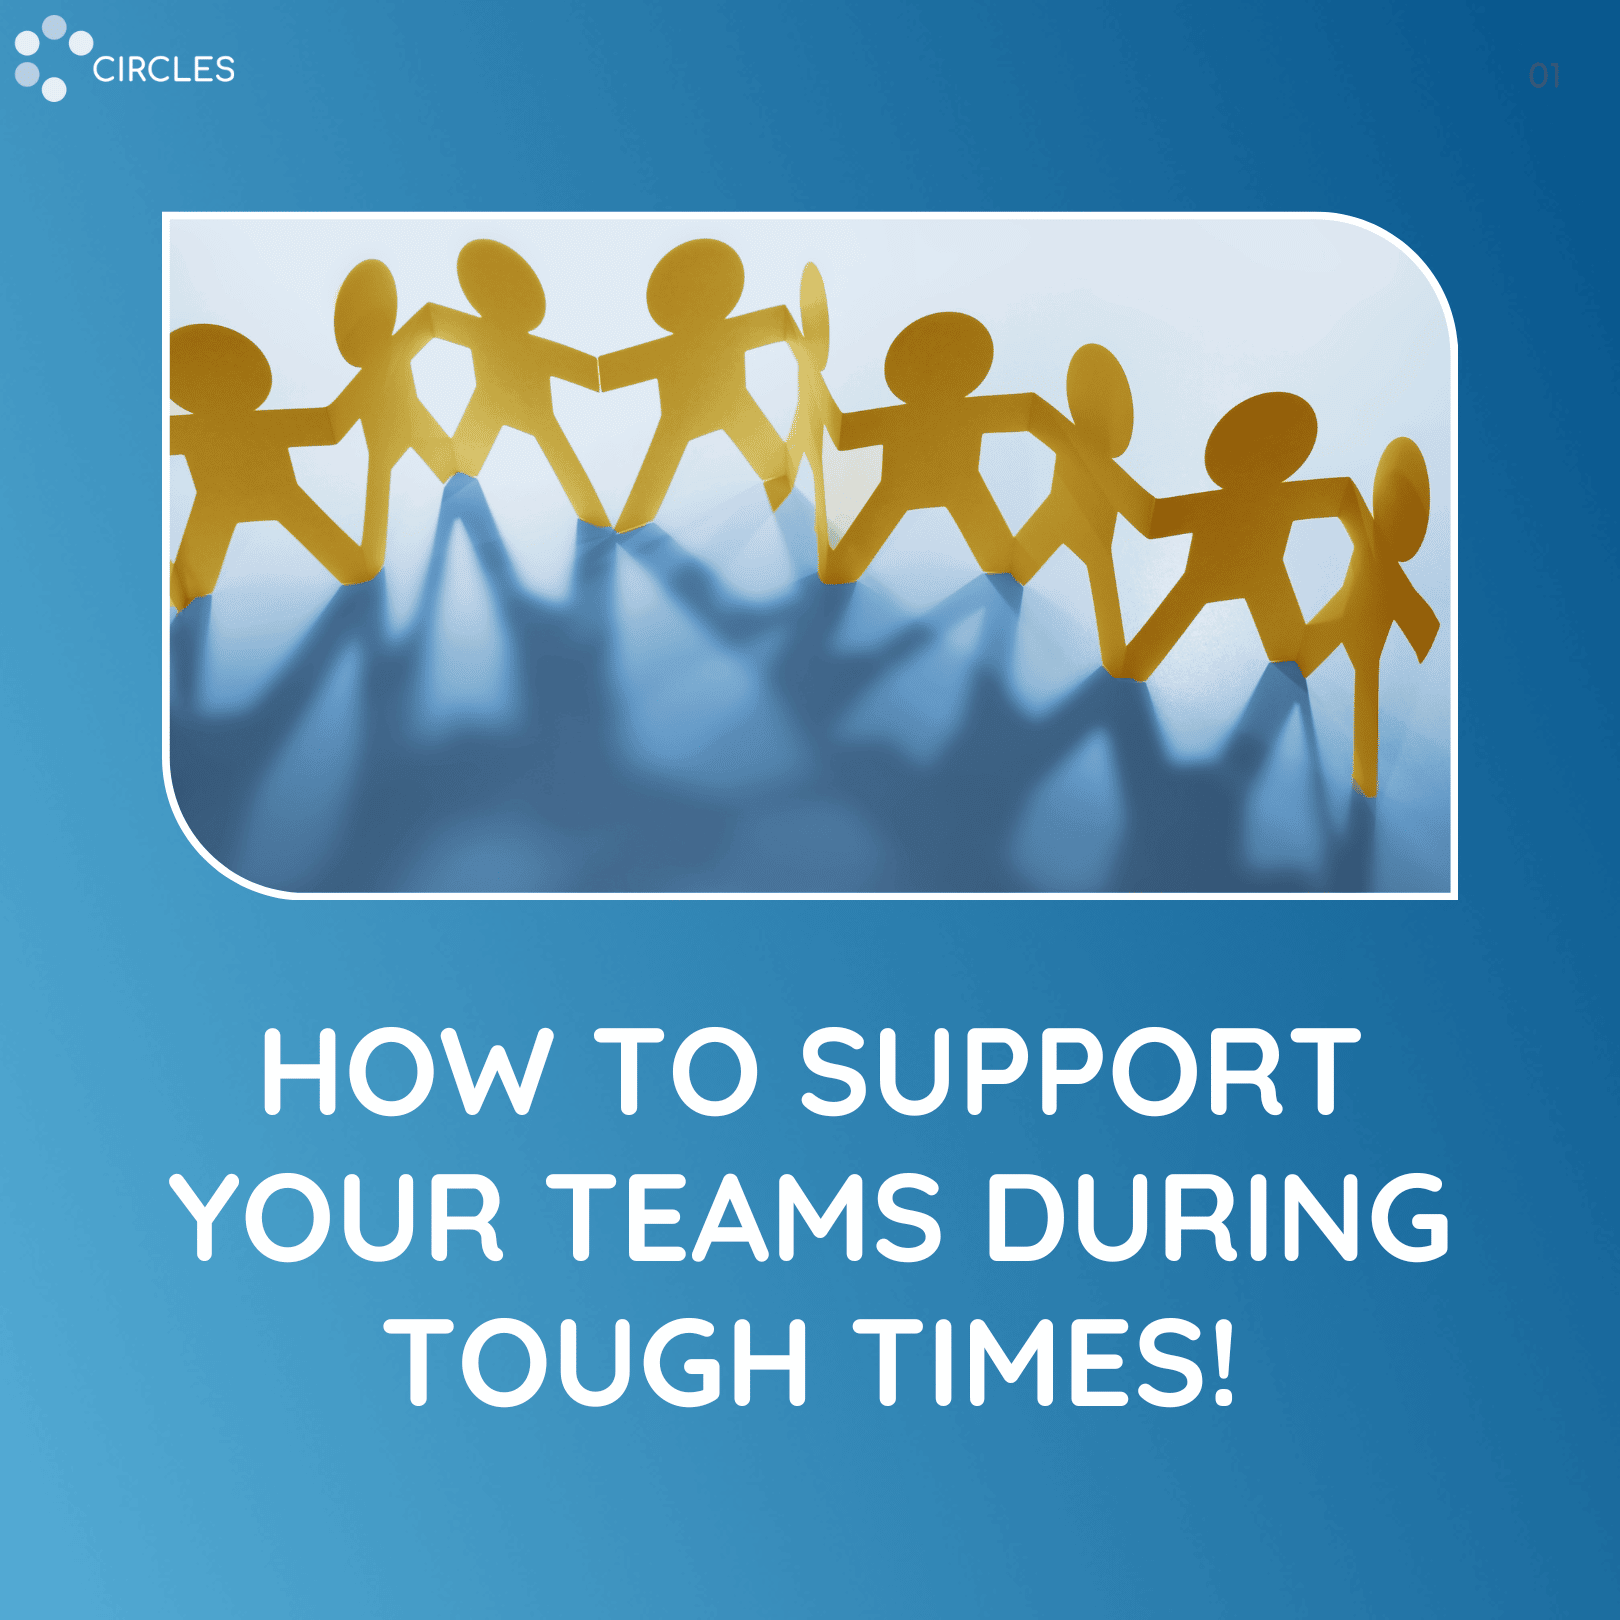 How to Support Your Teams During Tough Times